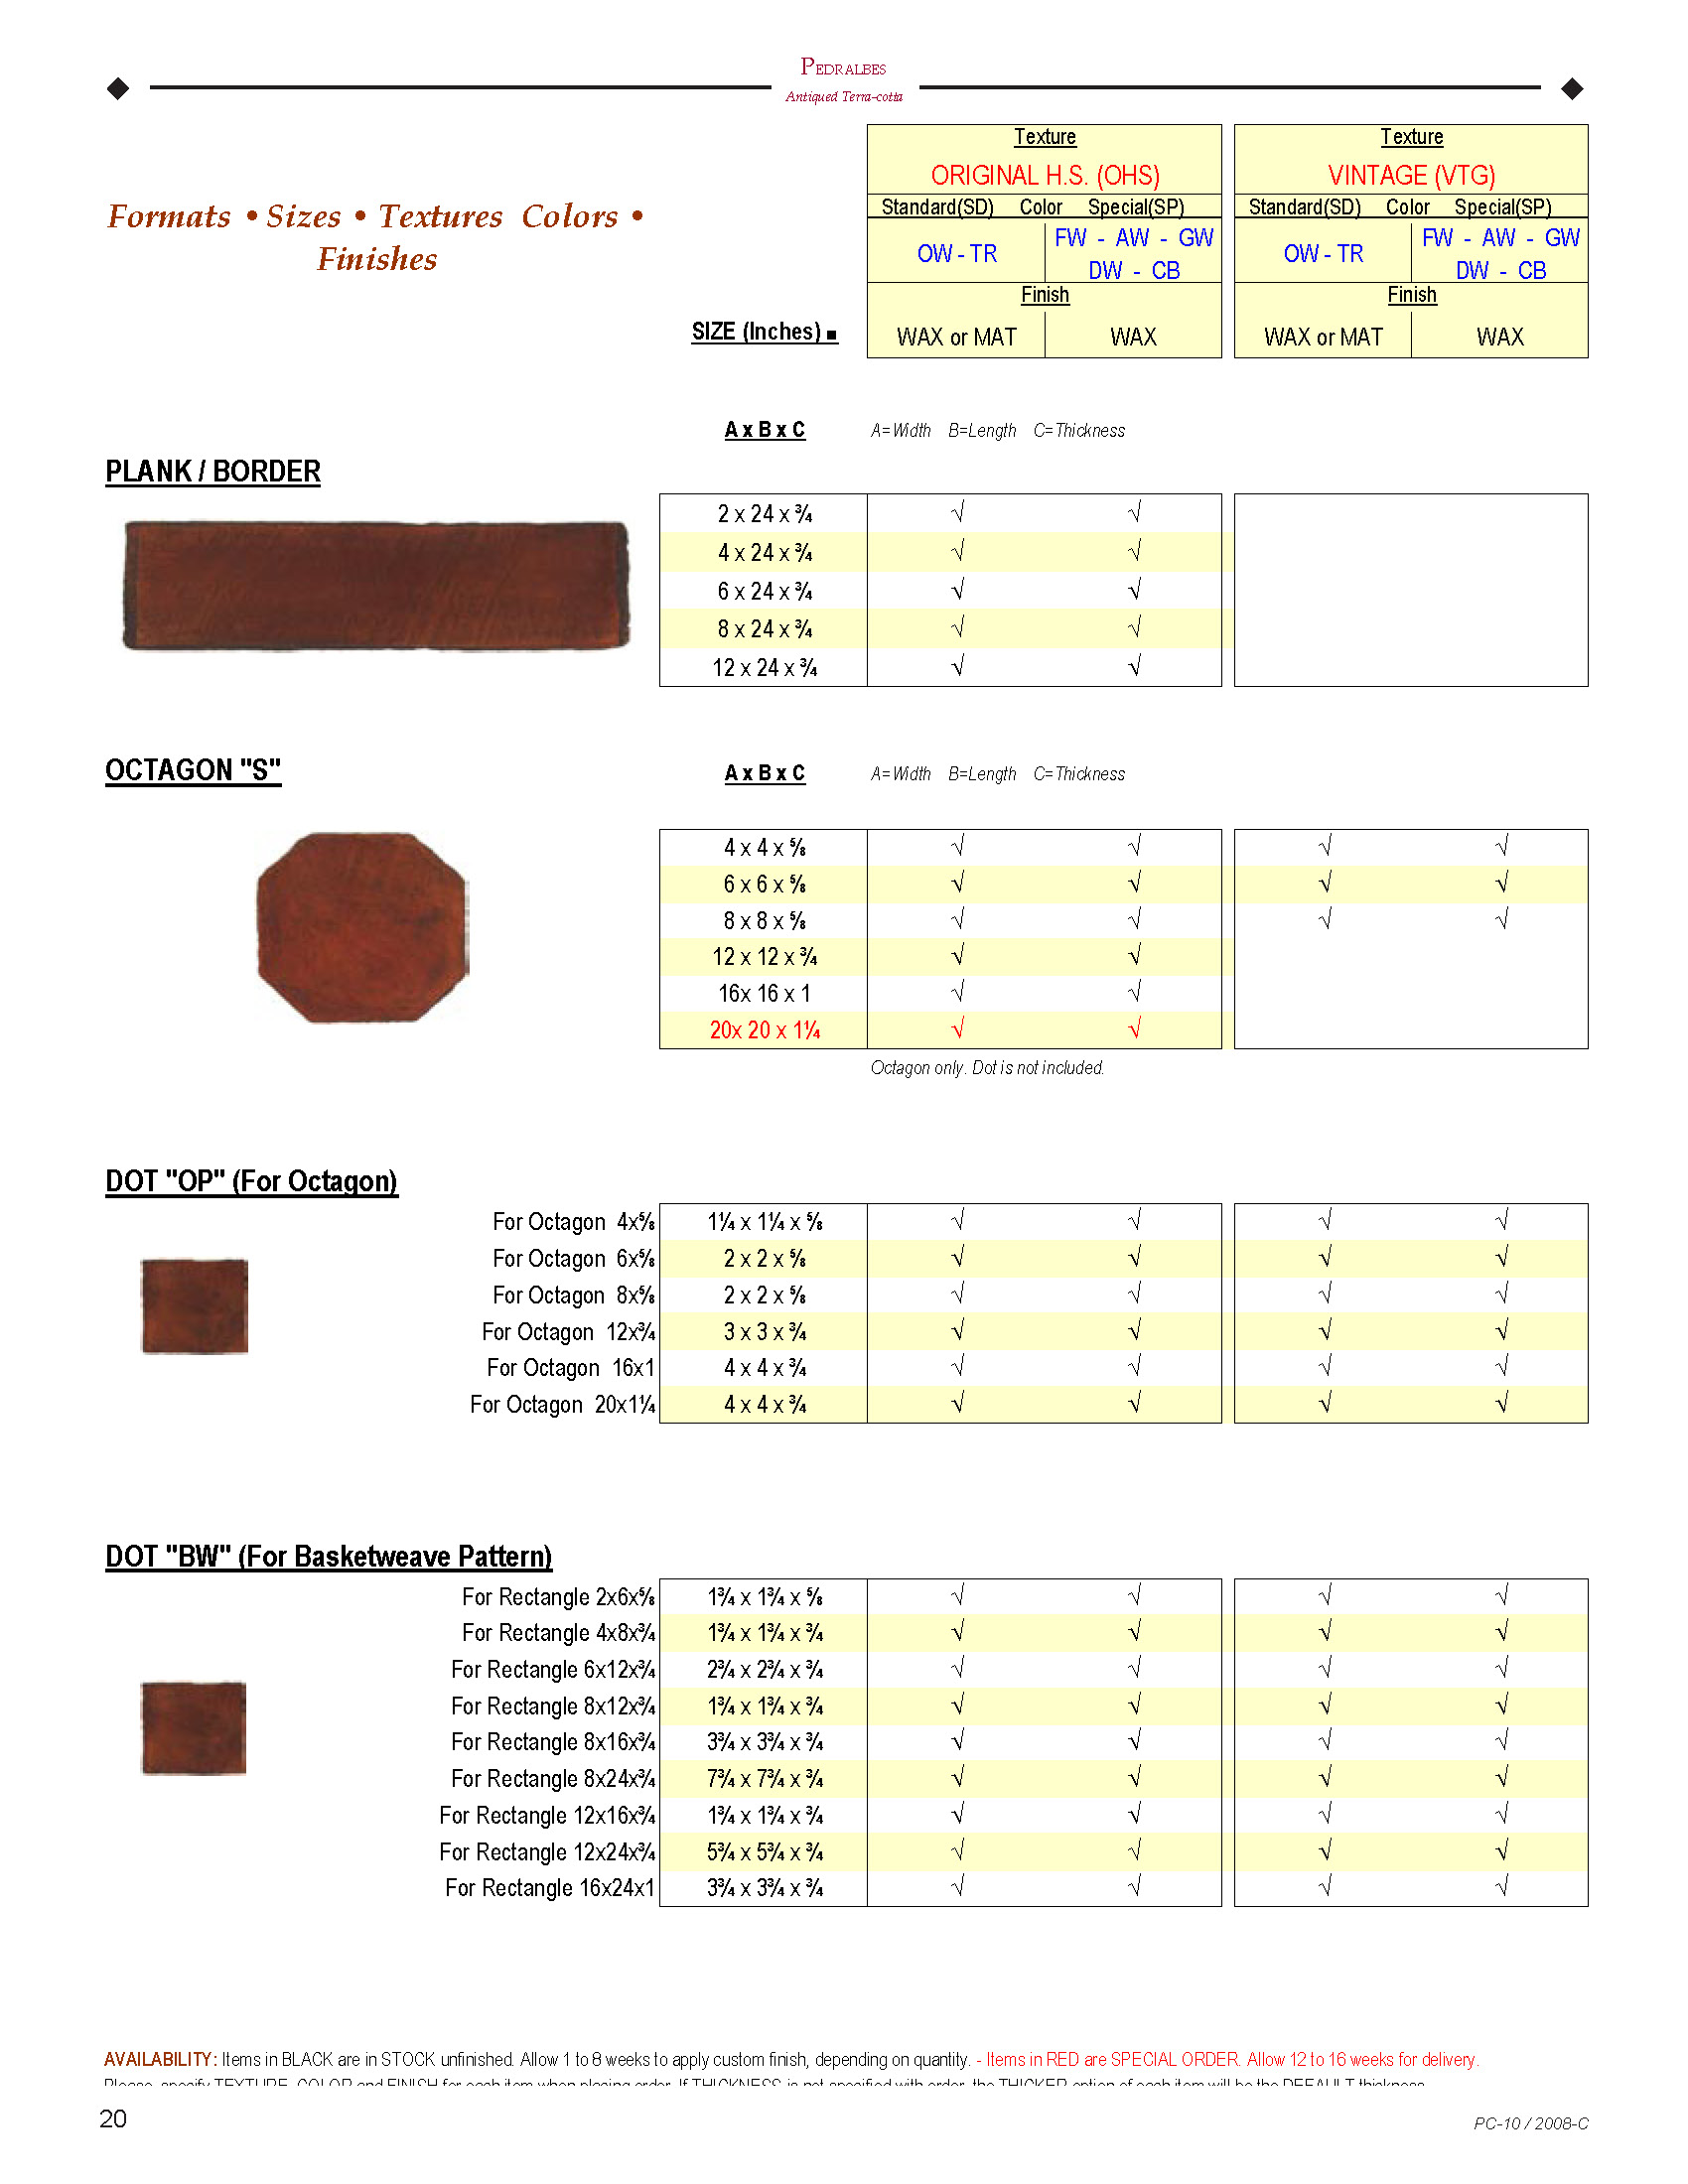 03-Formats+Sizes_Page_04.jpg